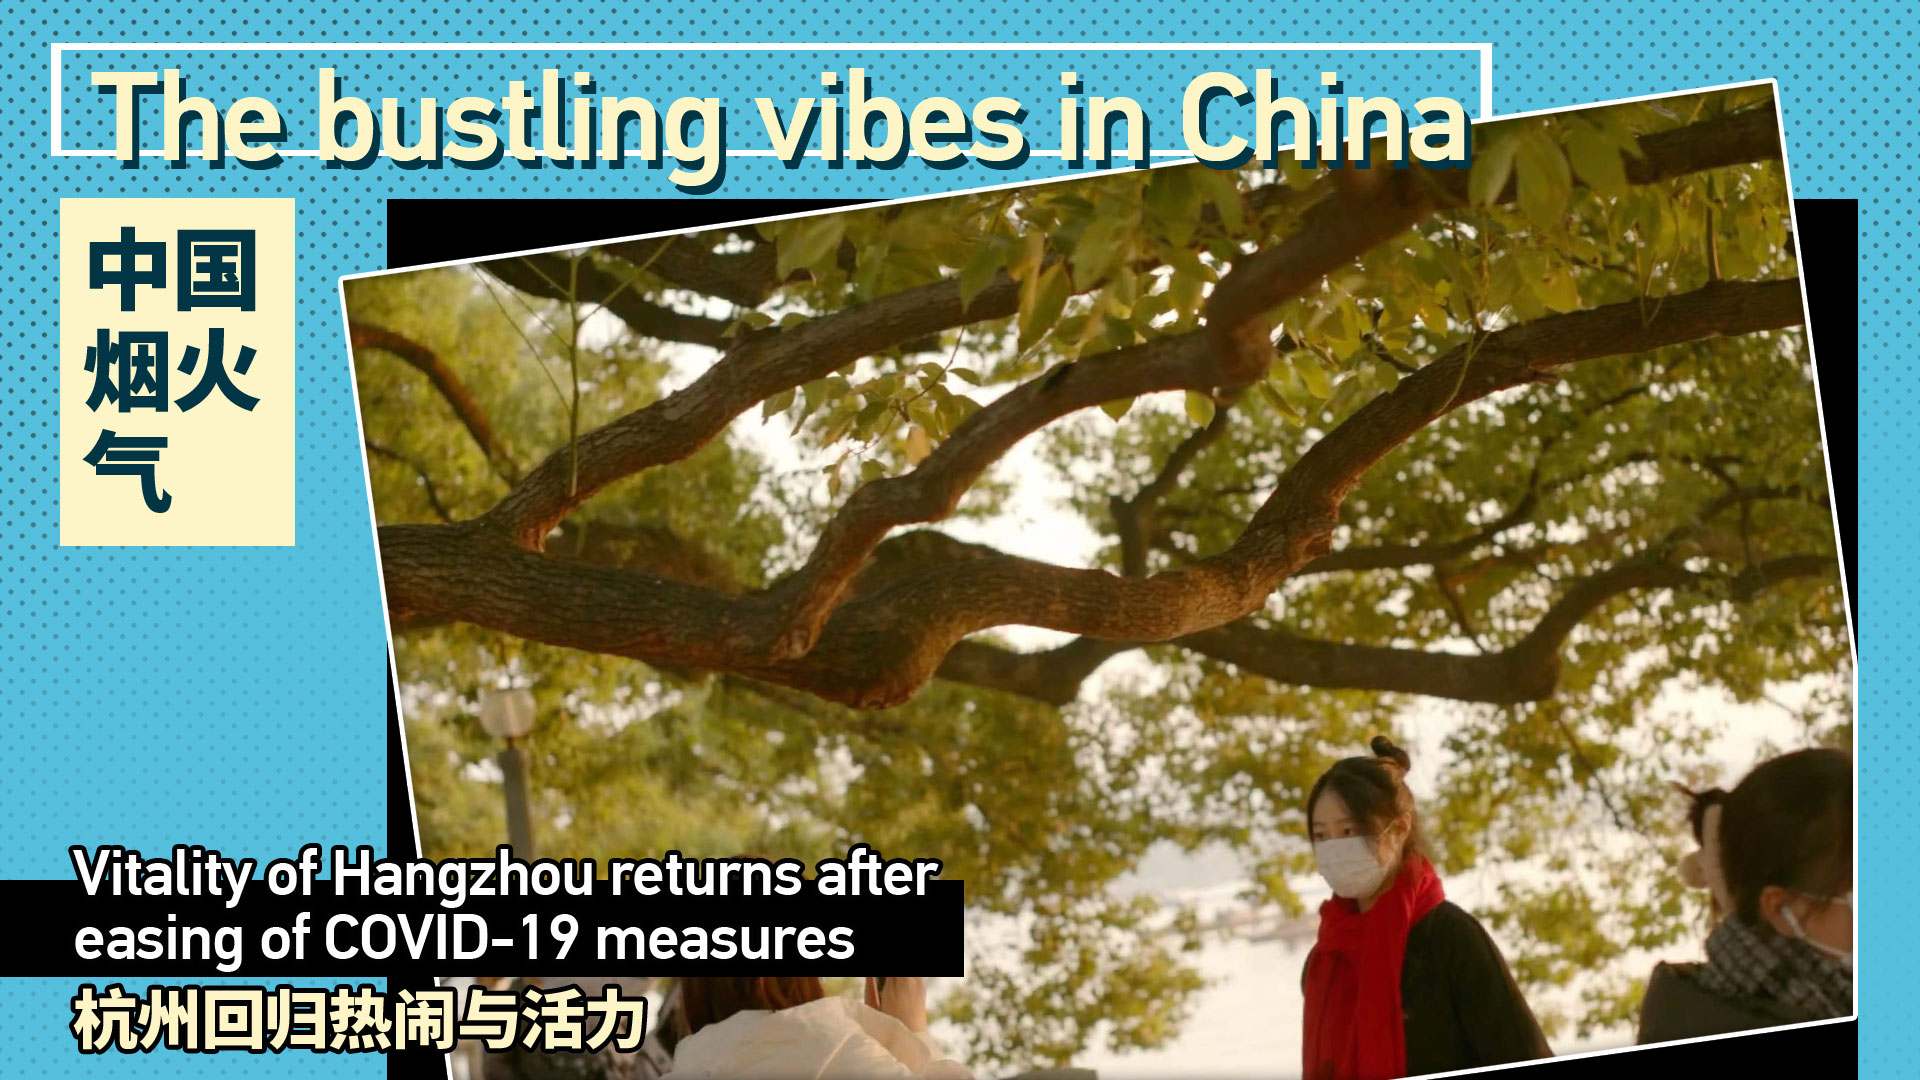 The bustling vibes in China: Vitality of Hangzhou returns after easing of COVID-19 measures